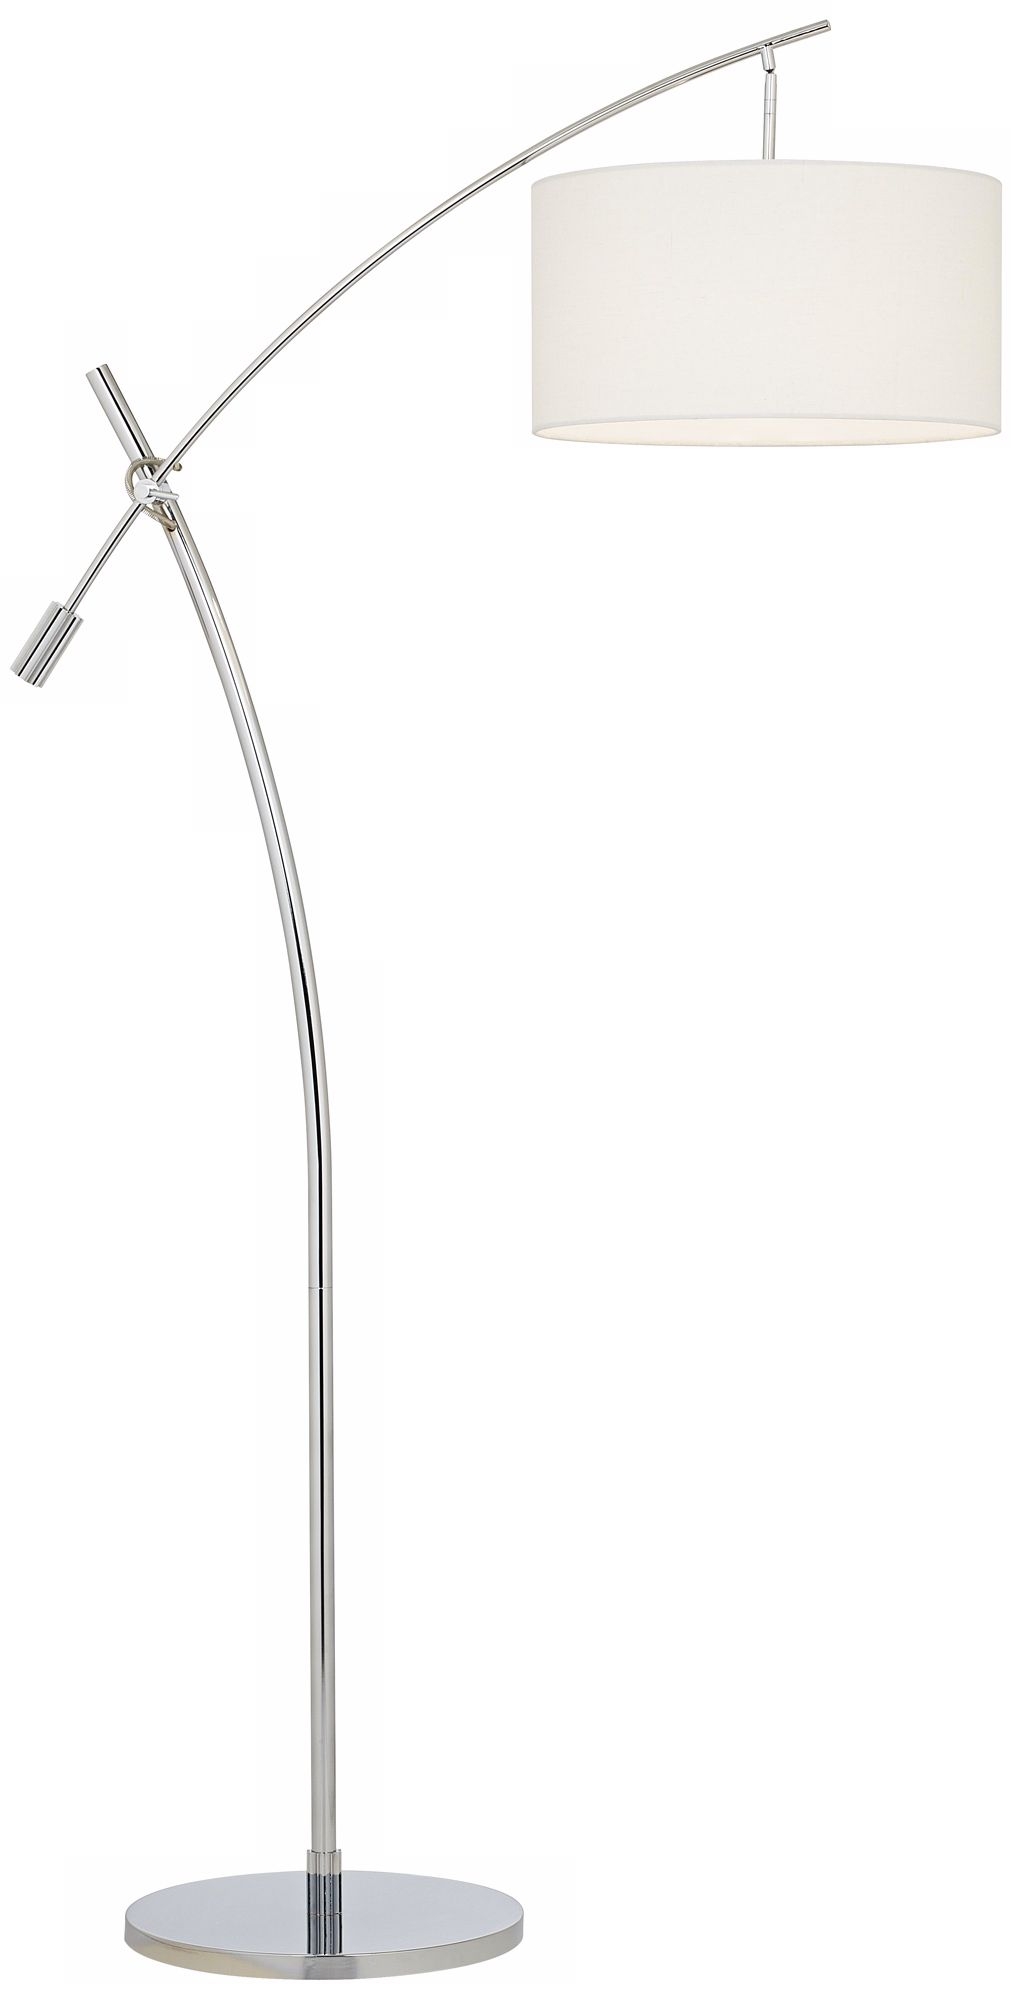 Brushed Steel Boom Arc Floor Lamp with Linen Shade - Image 0